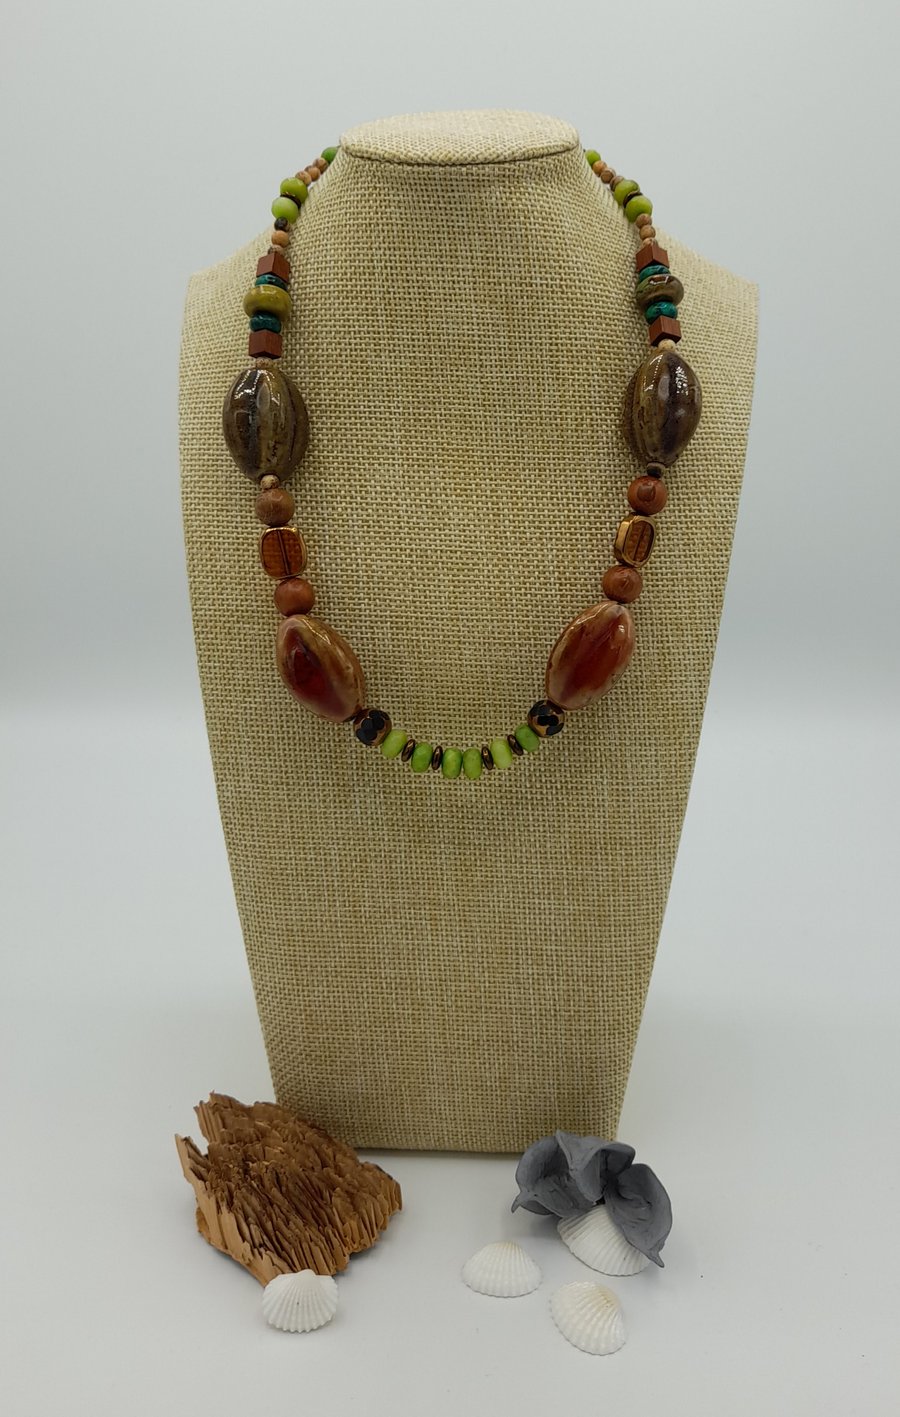 Ceramic and wood necklace